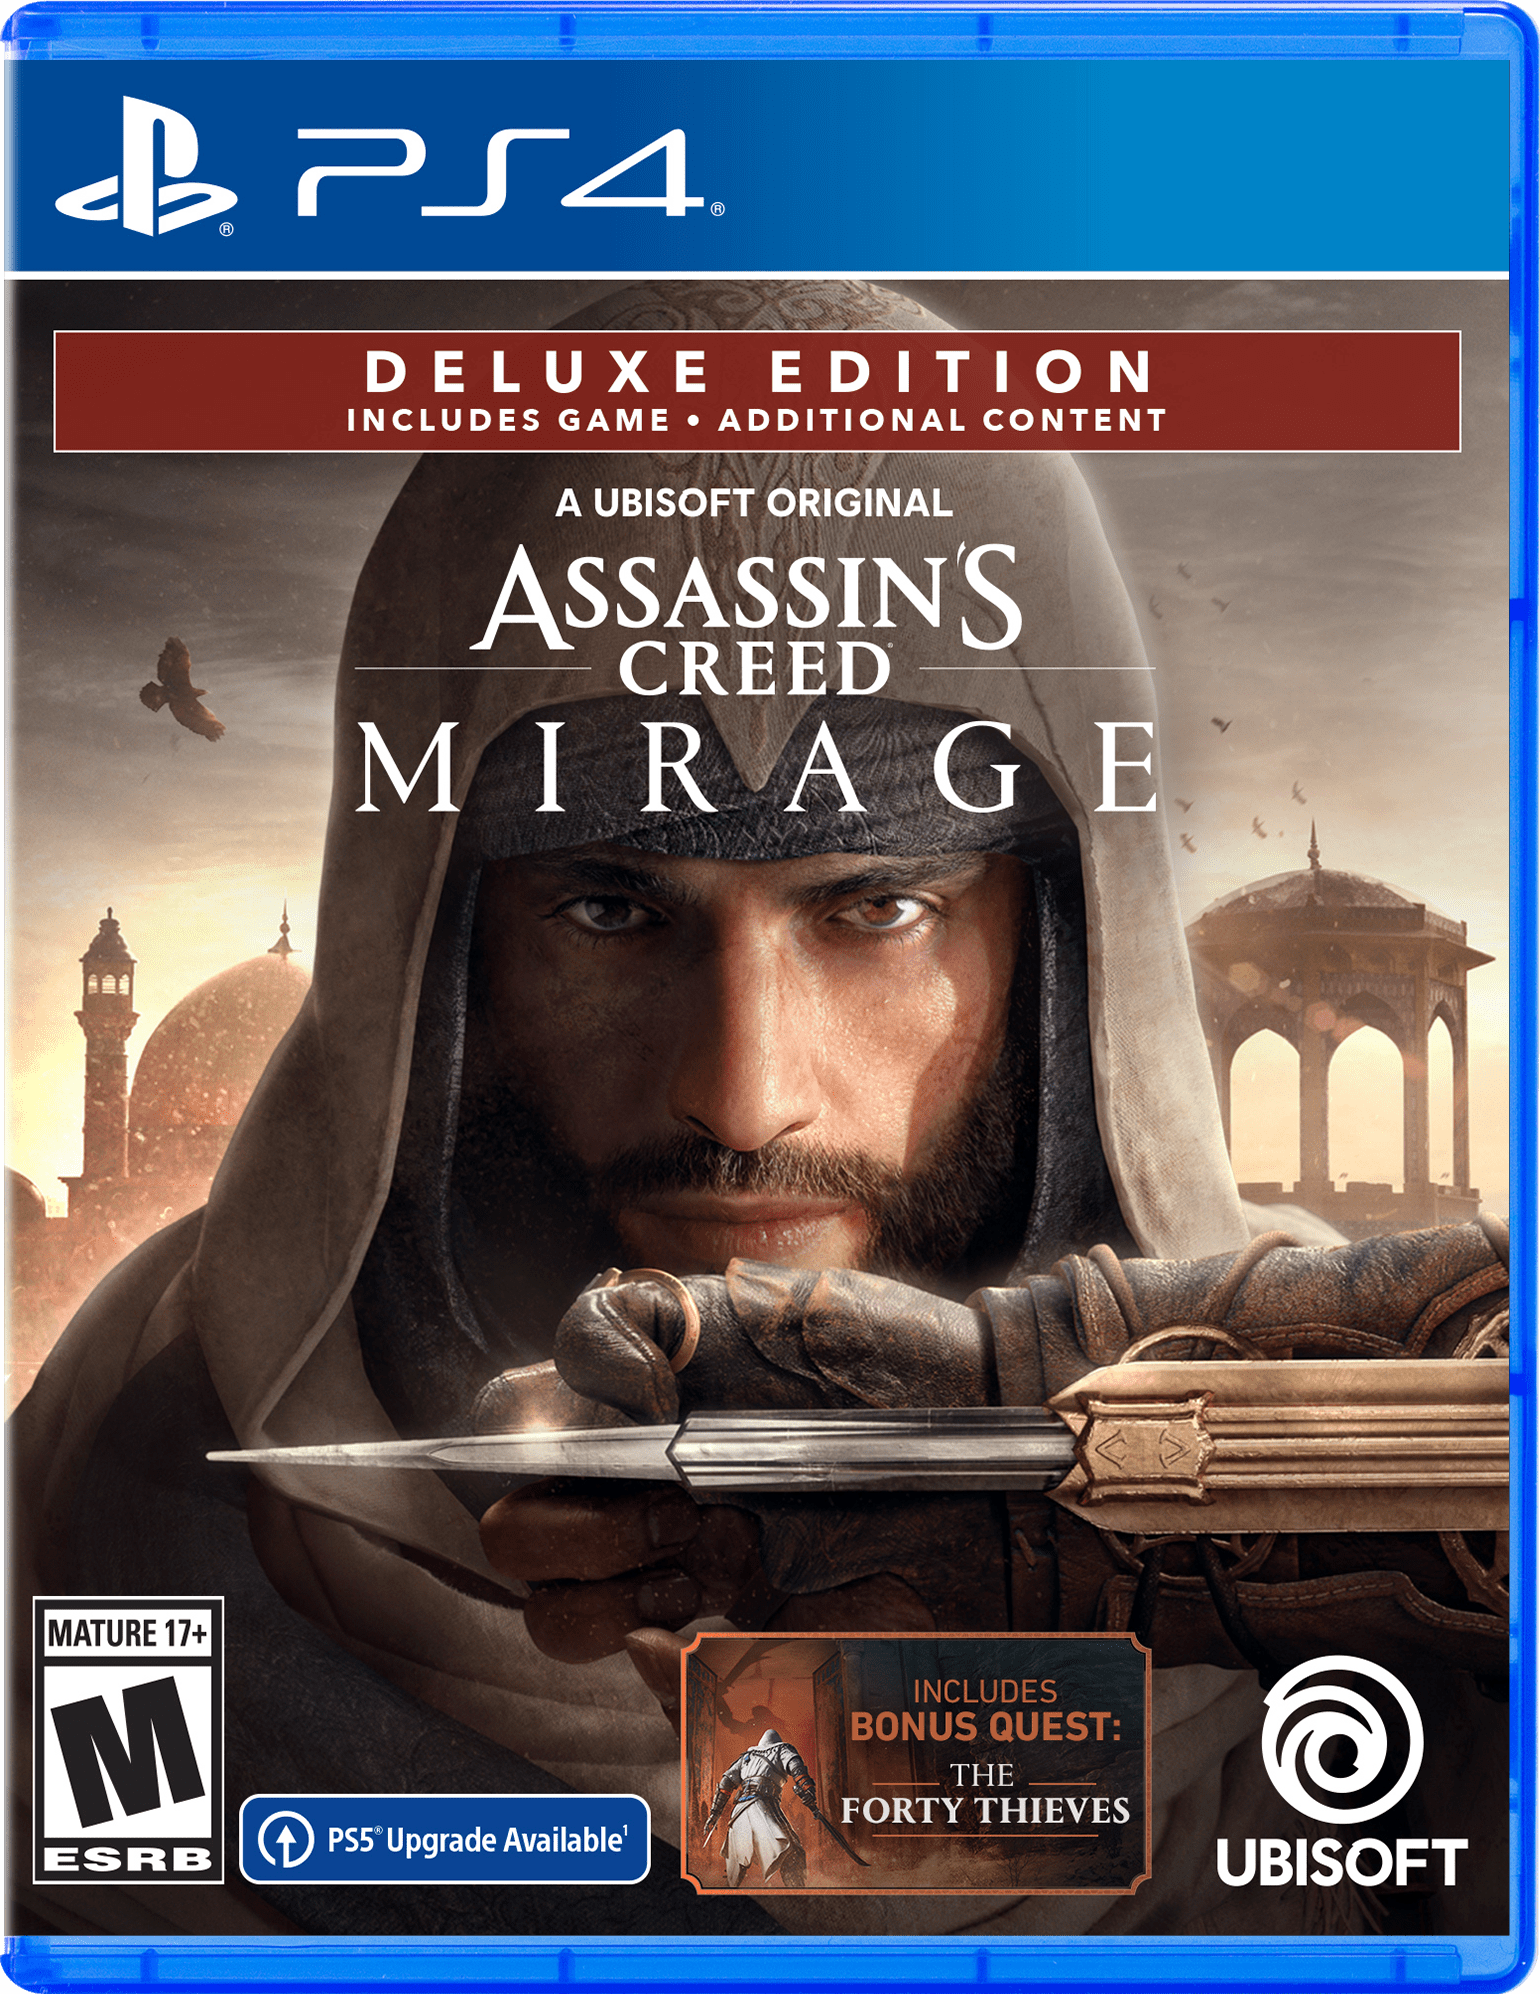 Watch Assassin's Creed Mirage Gameplay to win Goodies: Check out the details